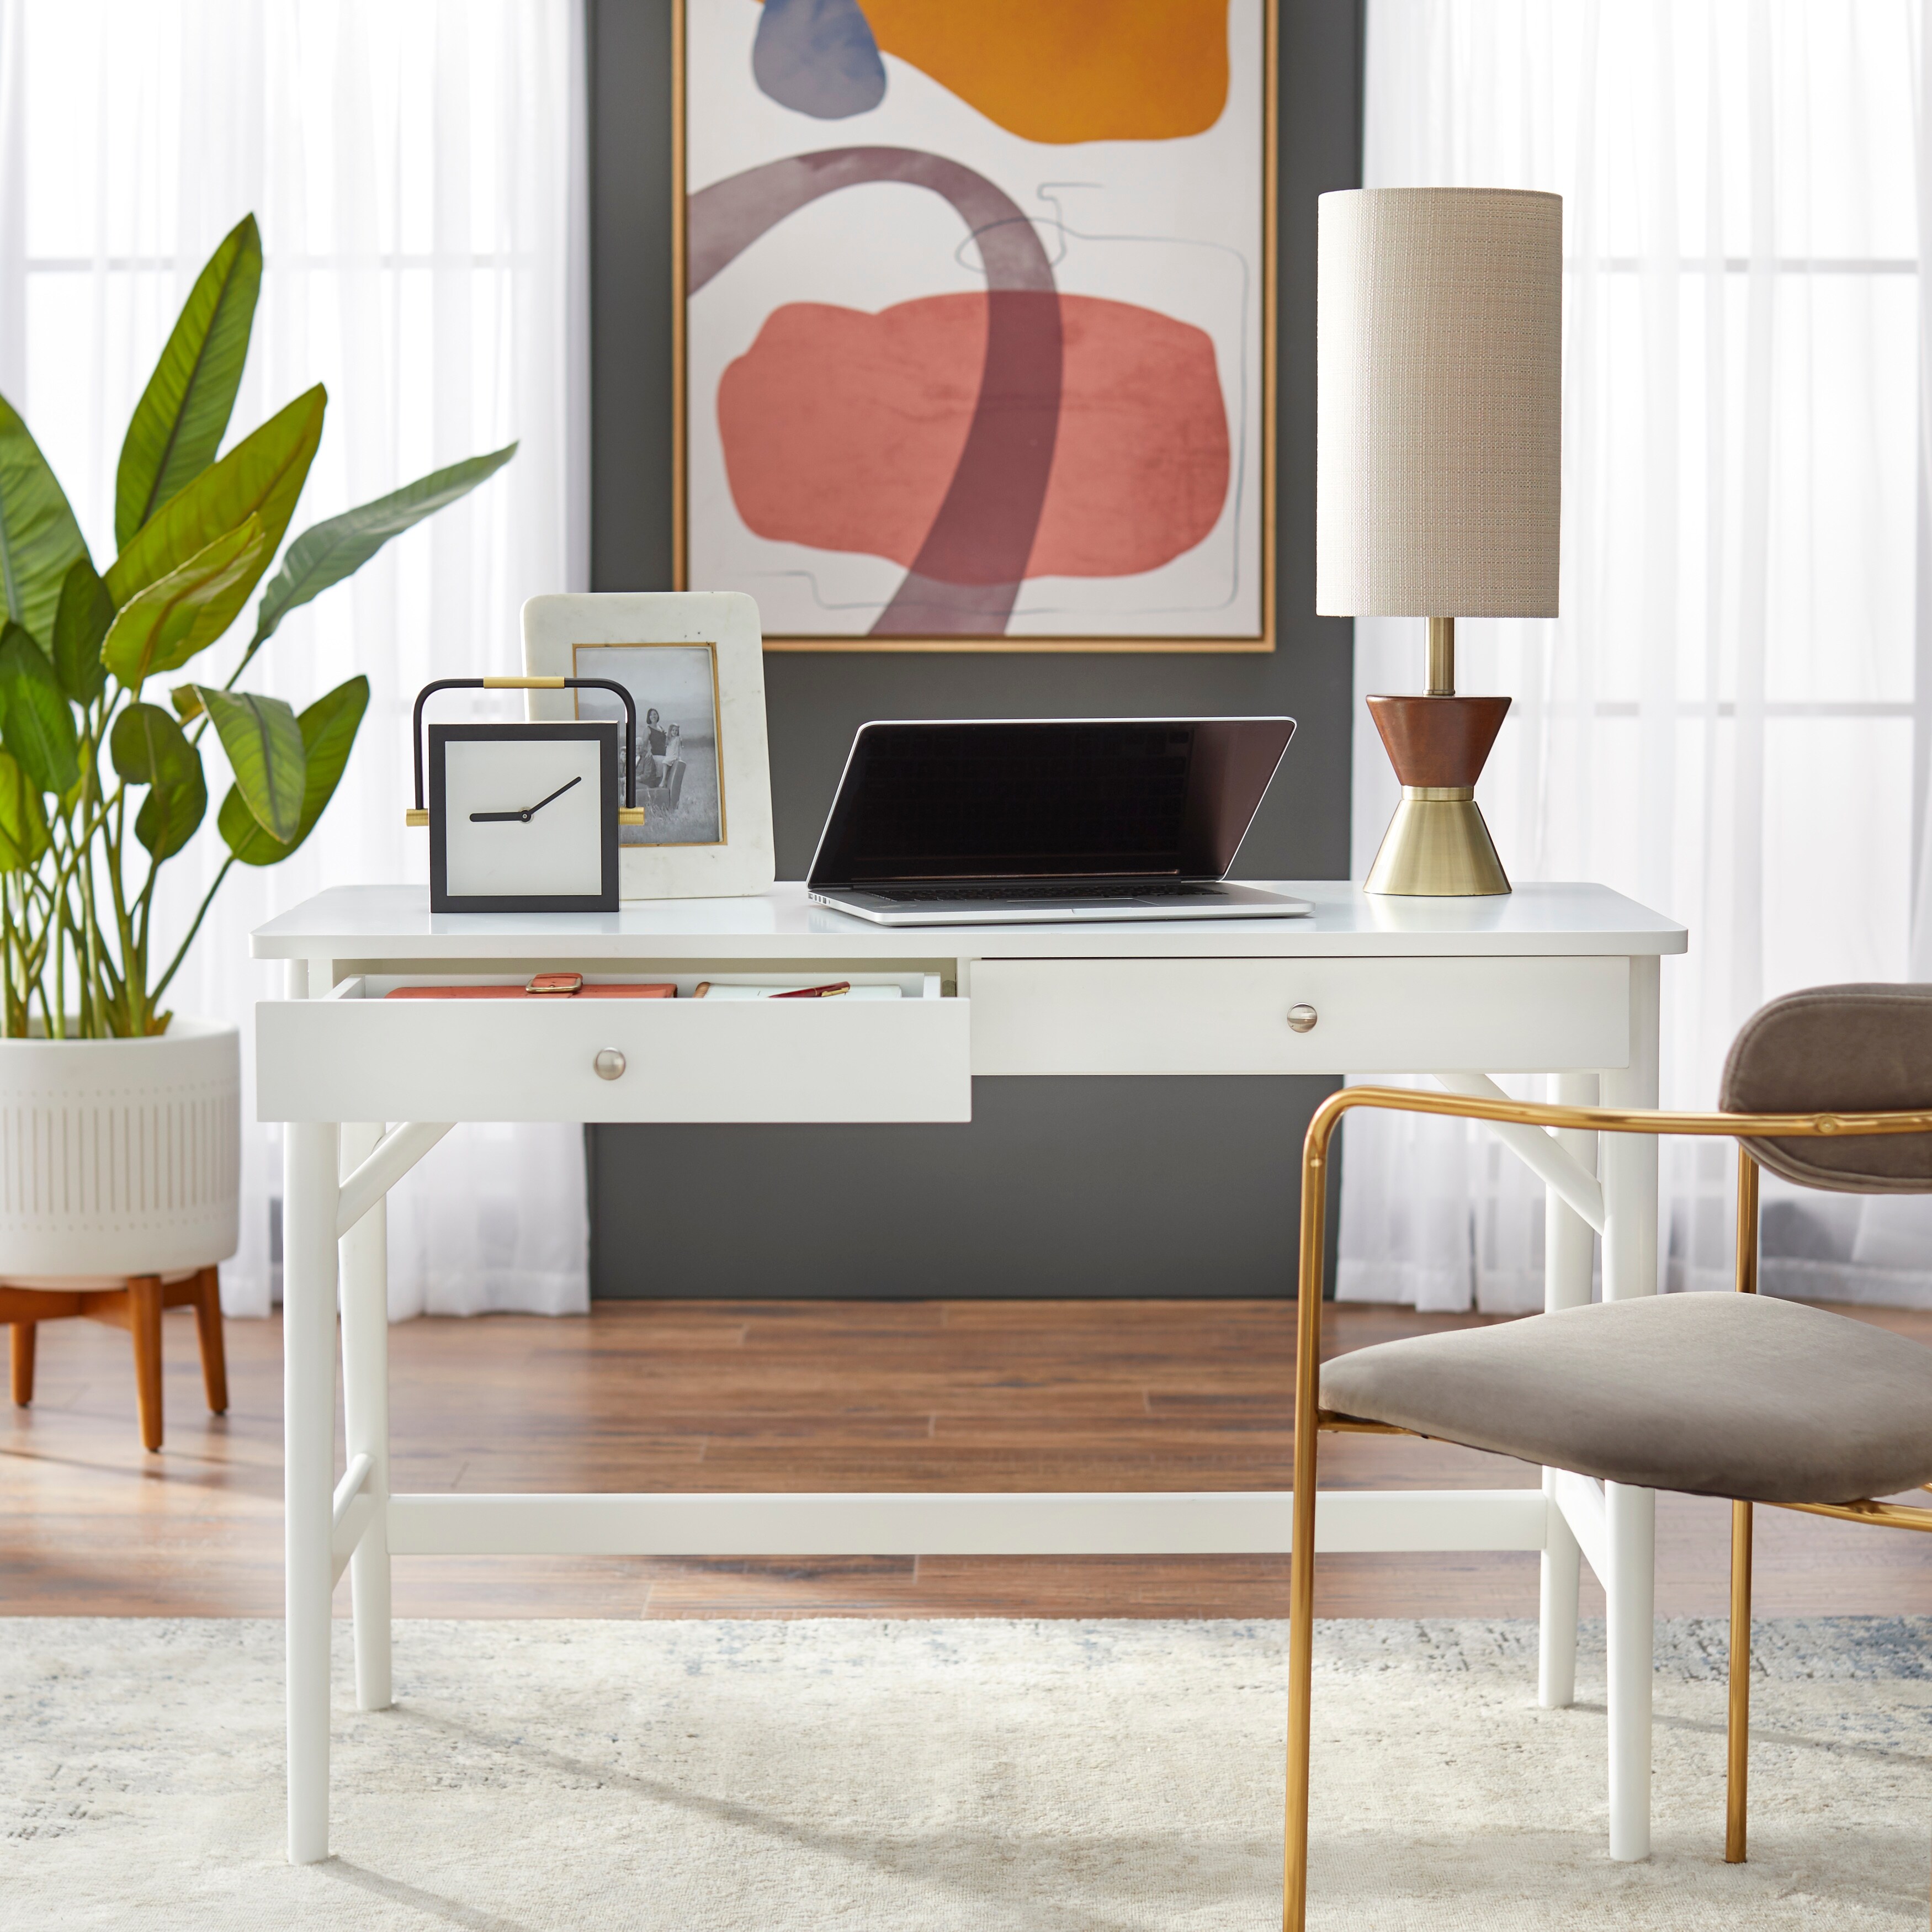 https://ak1.ostkcdn.com/images/products/is/images/direct/4bc8bb1d14e892bc8467a43a5507f2643857d365/Simple-Living-Vera-Mid-century-Desk.jpg